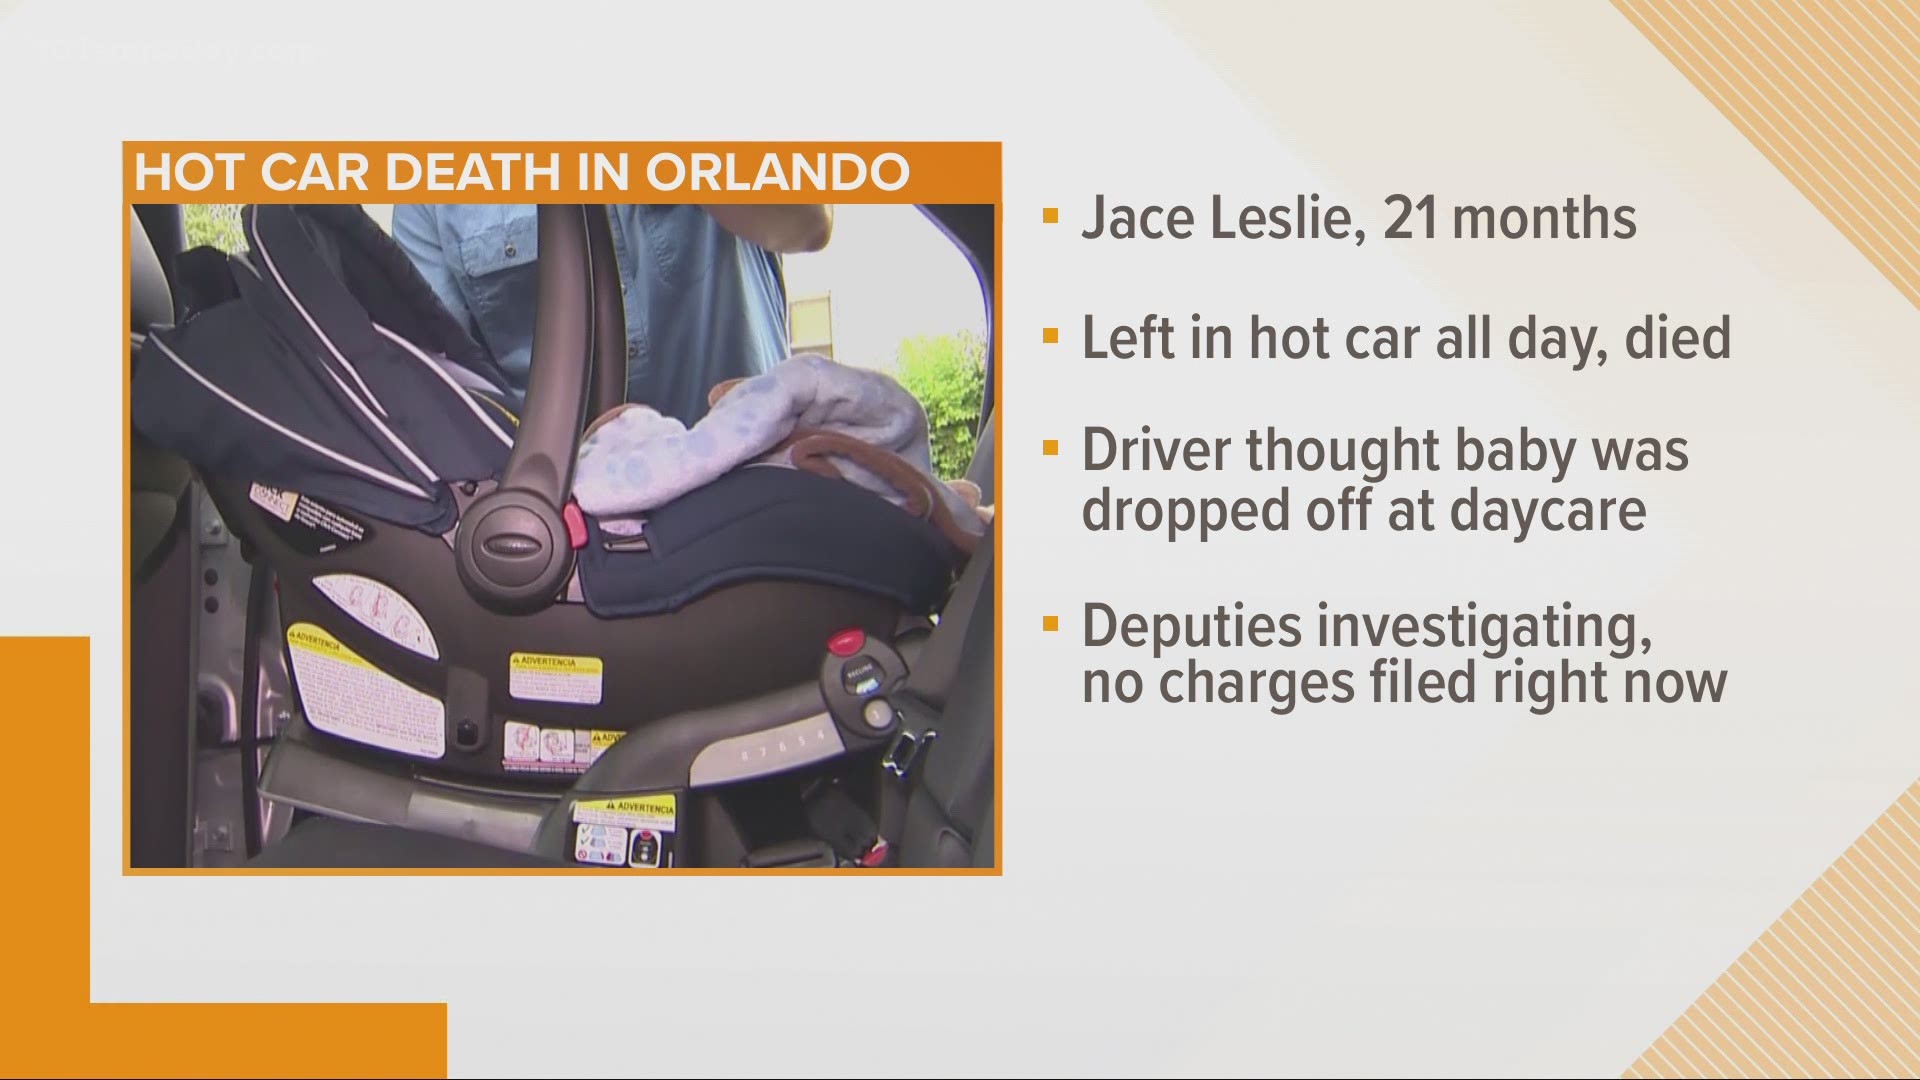 A local neuroscientist explains why hot car deaths happen and says it can happen to anyone.